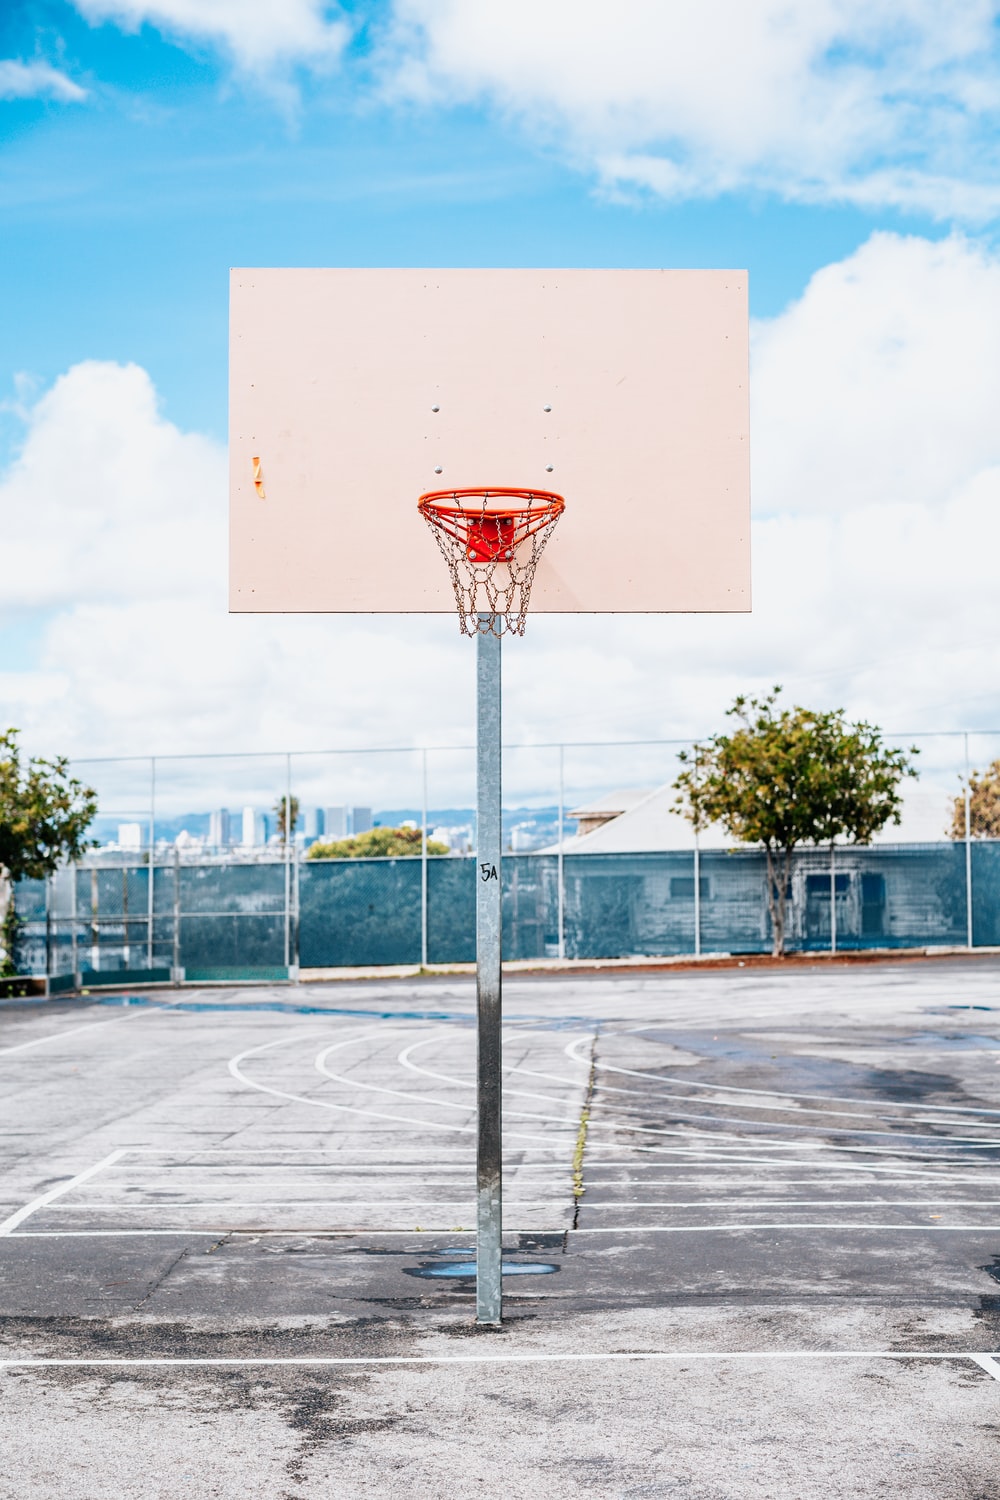 Basketball Net Picture. Download Free Image